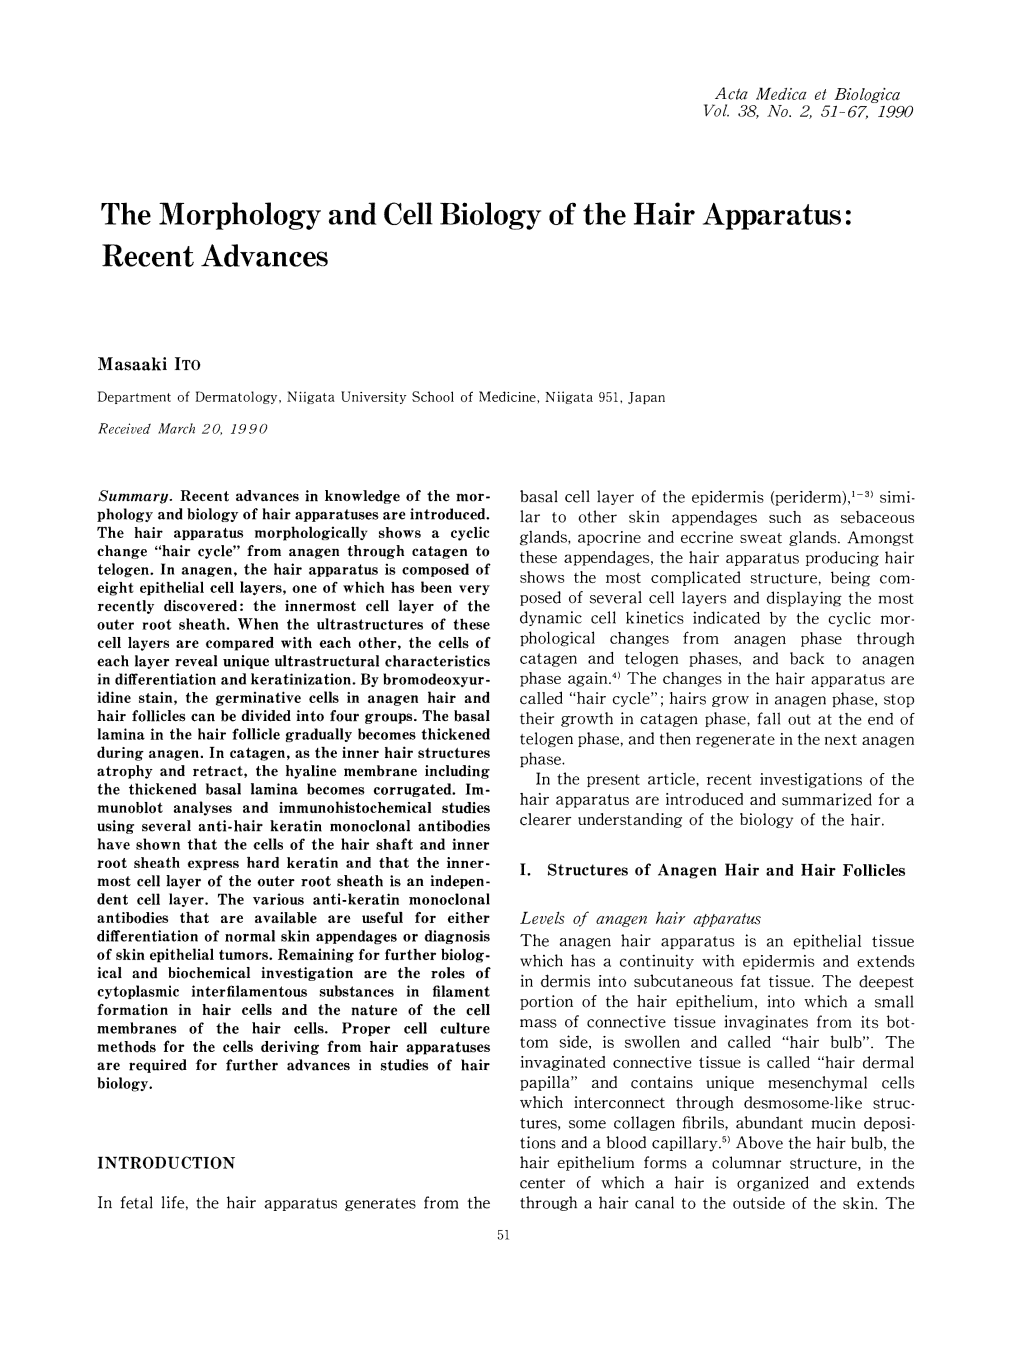 The Morphology and Cell Biology of the Hair Apparatus : Recent Advances